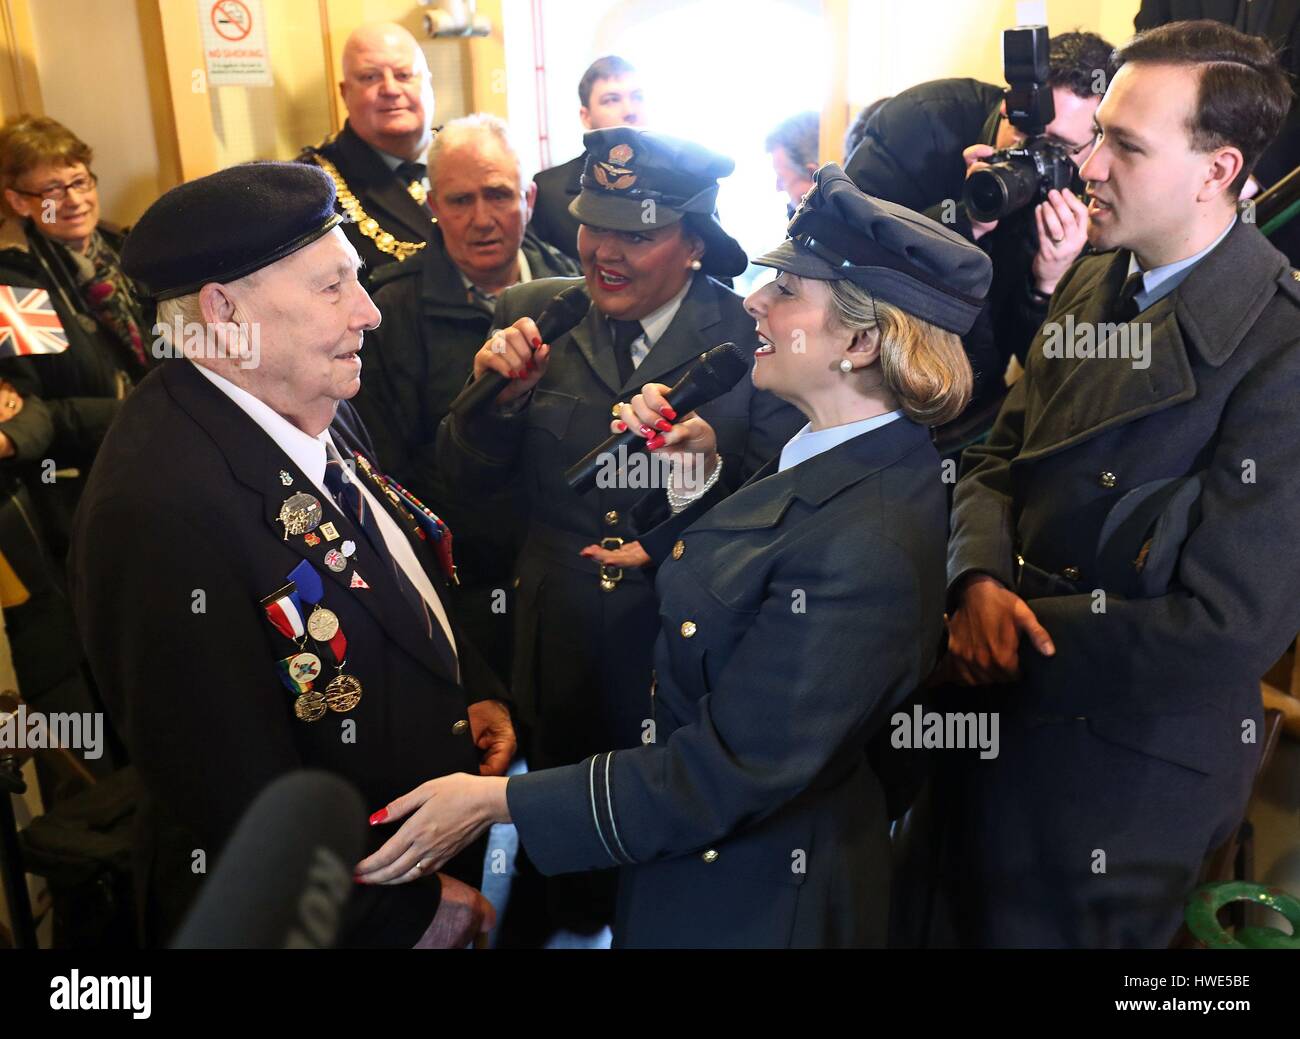 Learna Castle of Swingtime Sweethearts performs a song to World War Two veteran Robert Piper during a tribute to Dame Vera Lynn at South Foreland Lighthouse in Dover Kent to mark her 100th birthday. Stock Photo